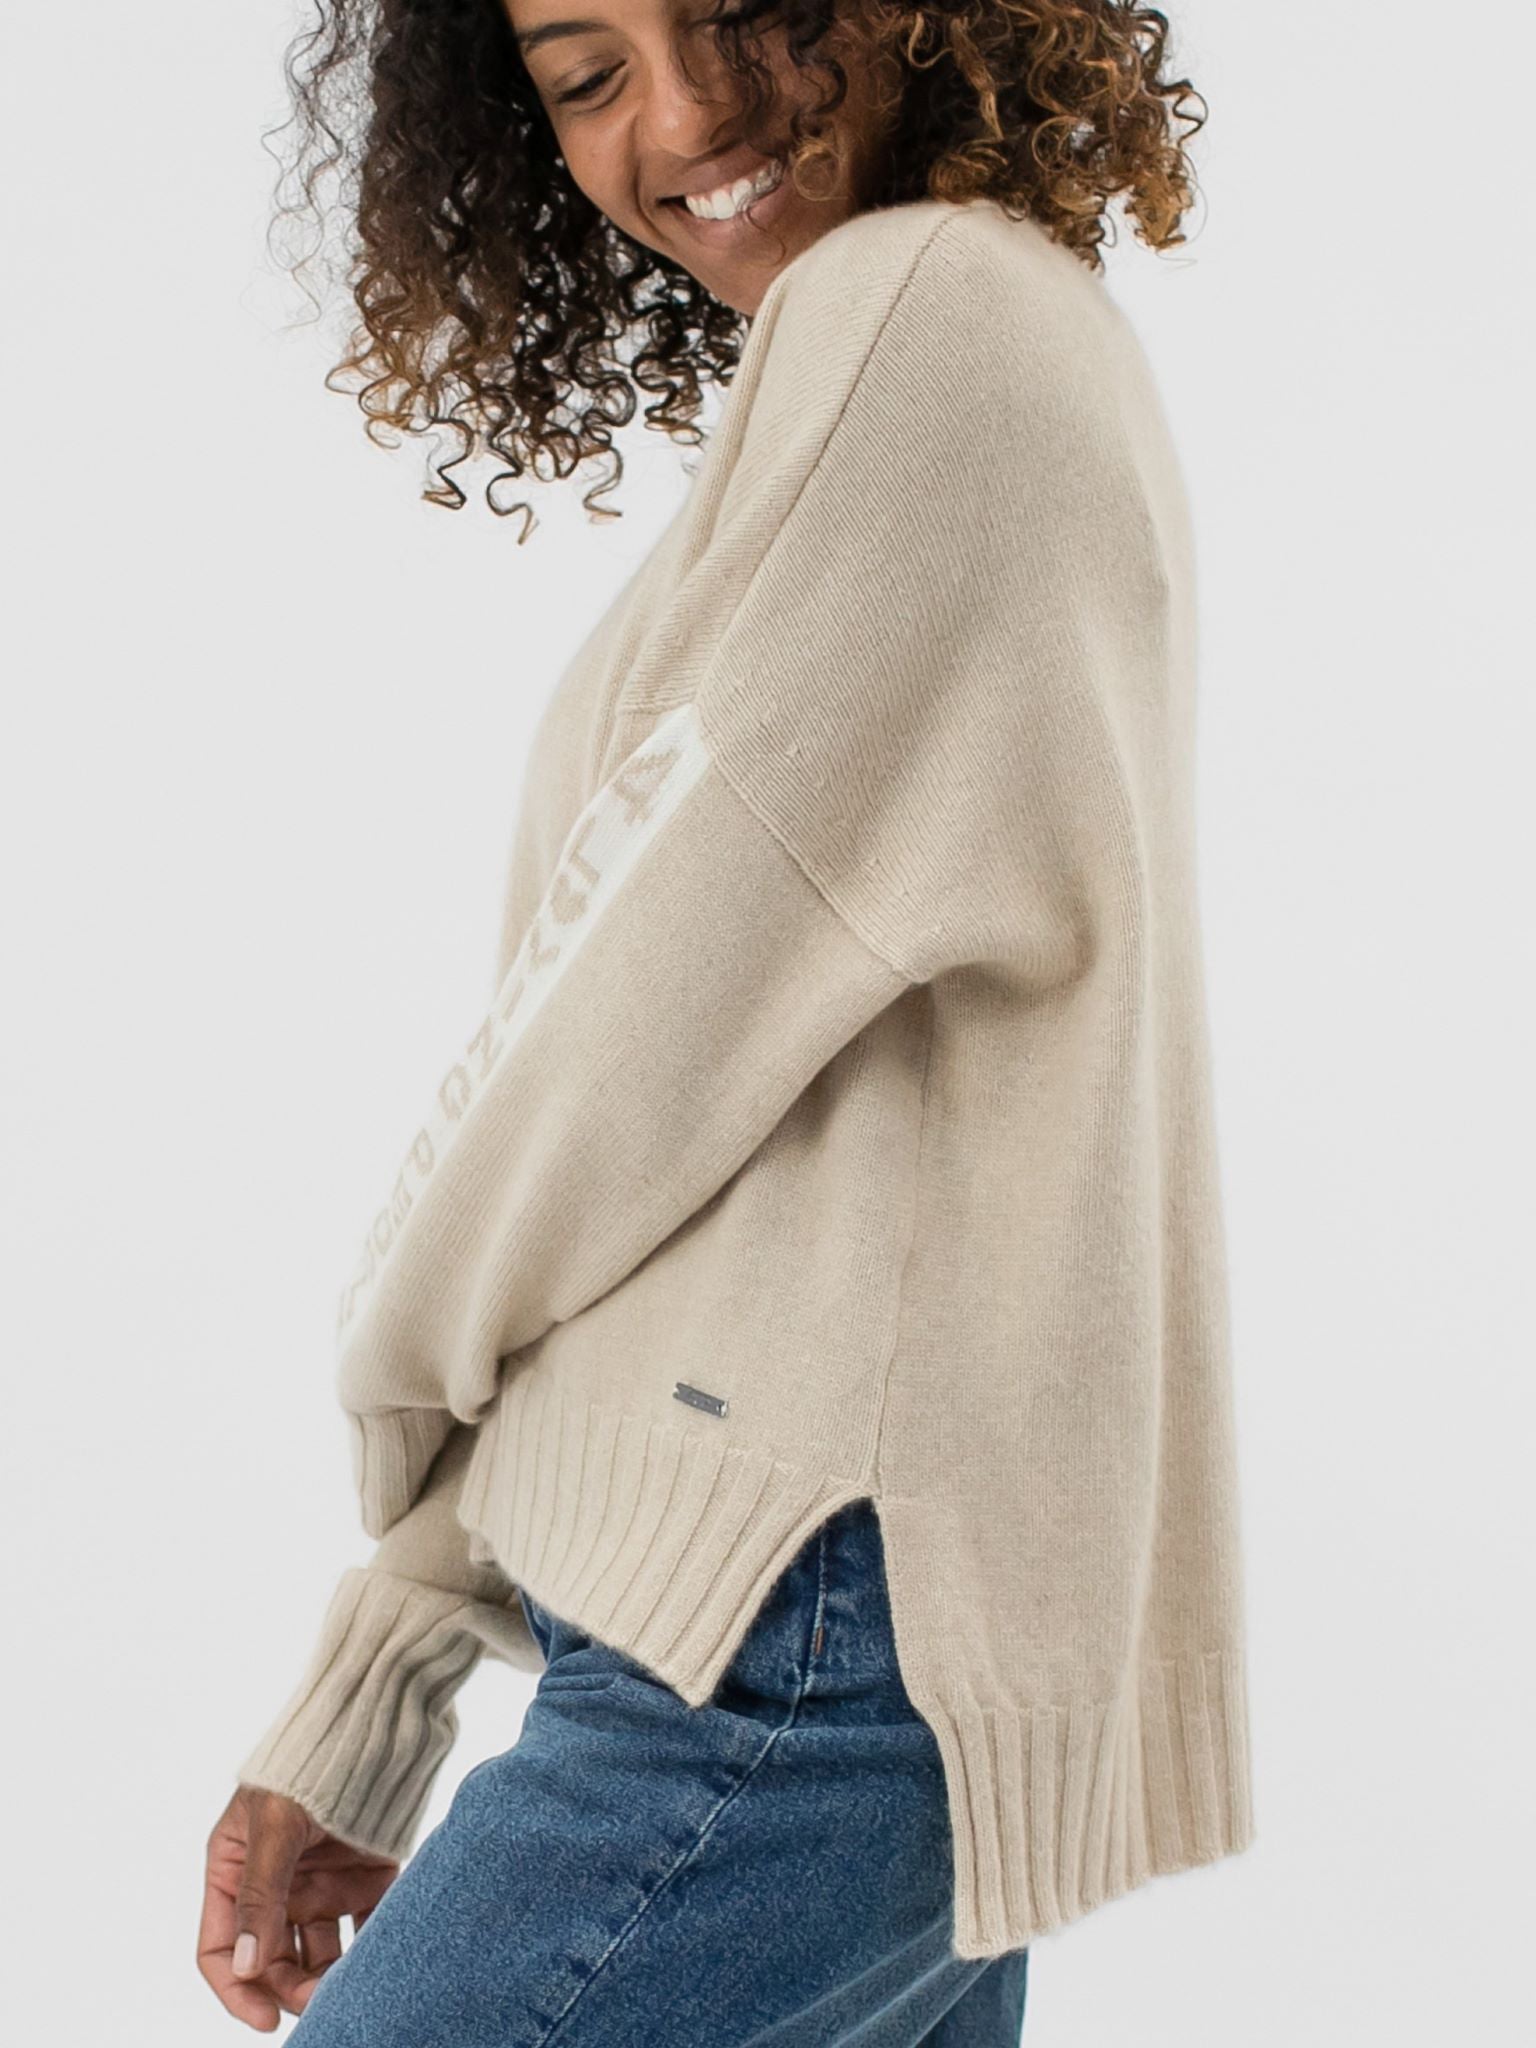 Cashmere Crewneck with High and Low Hem